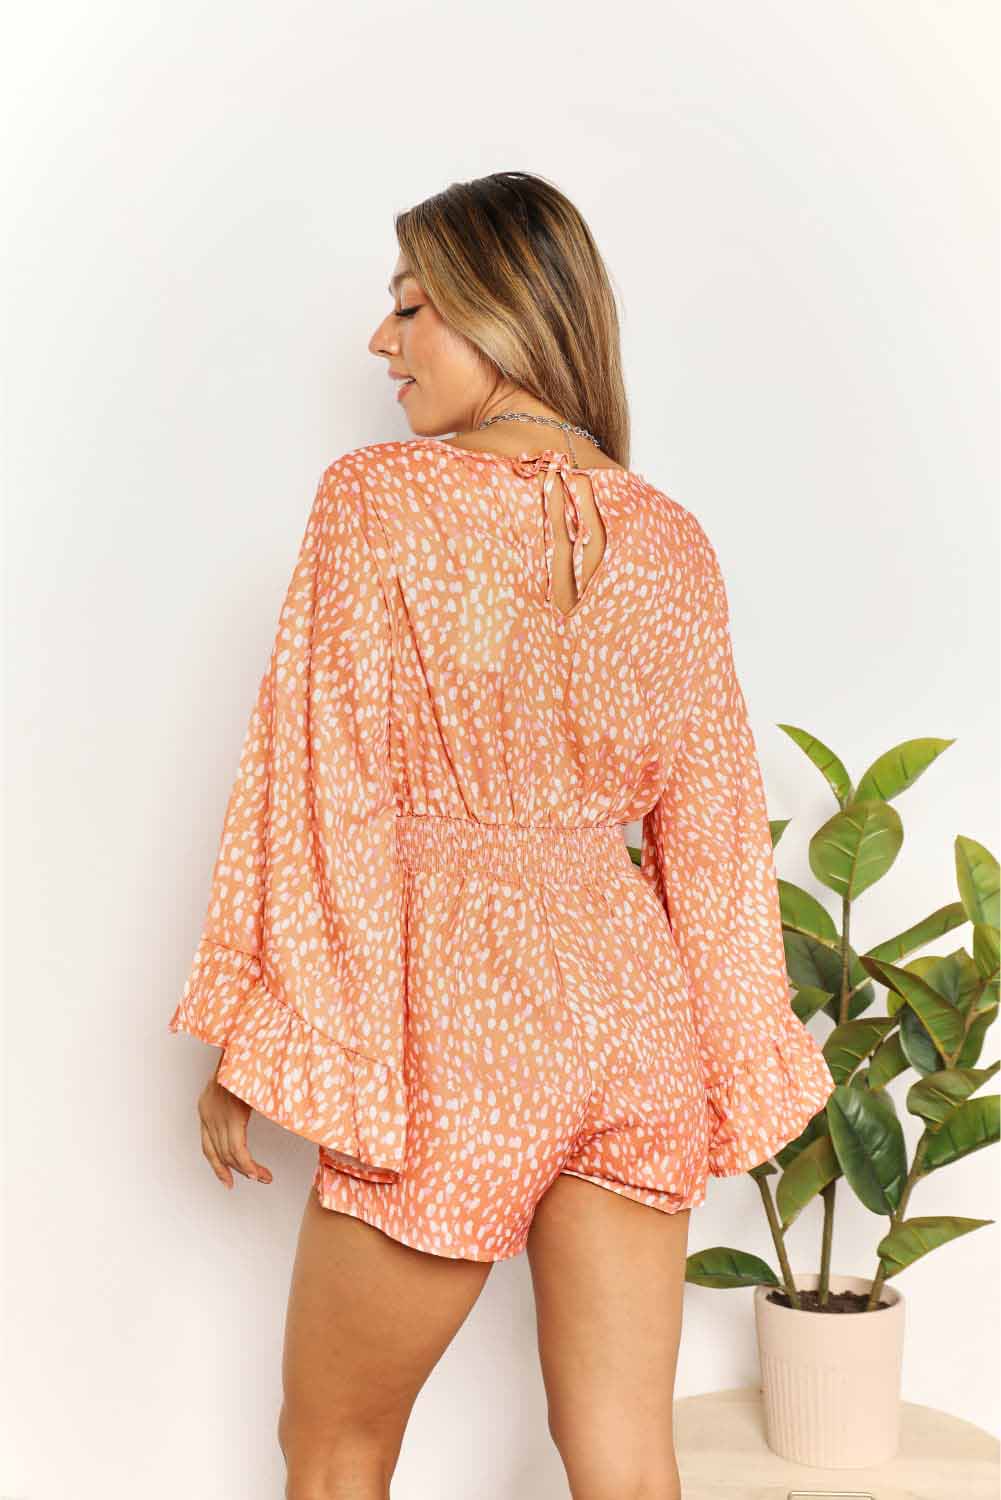 FEATHERED FANTASY ROMPER